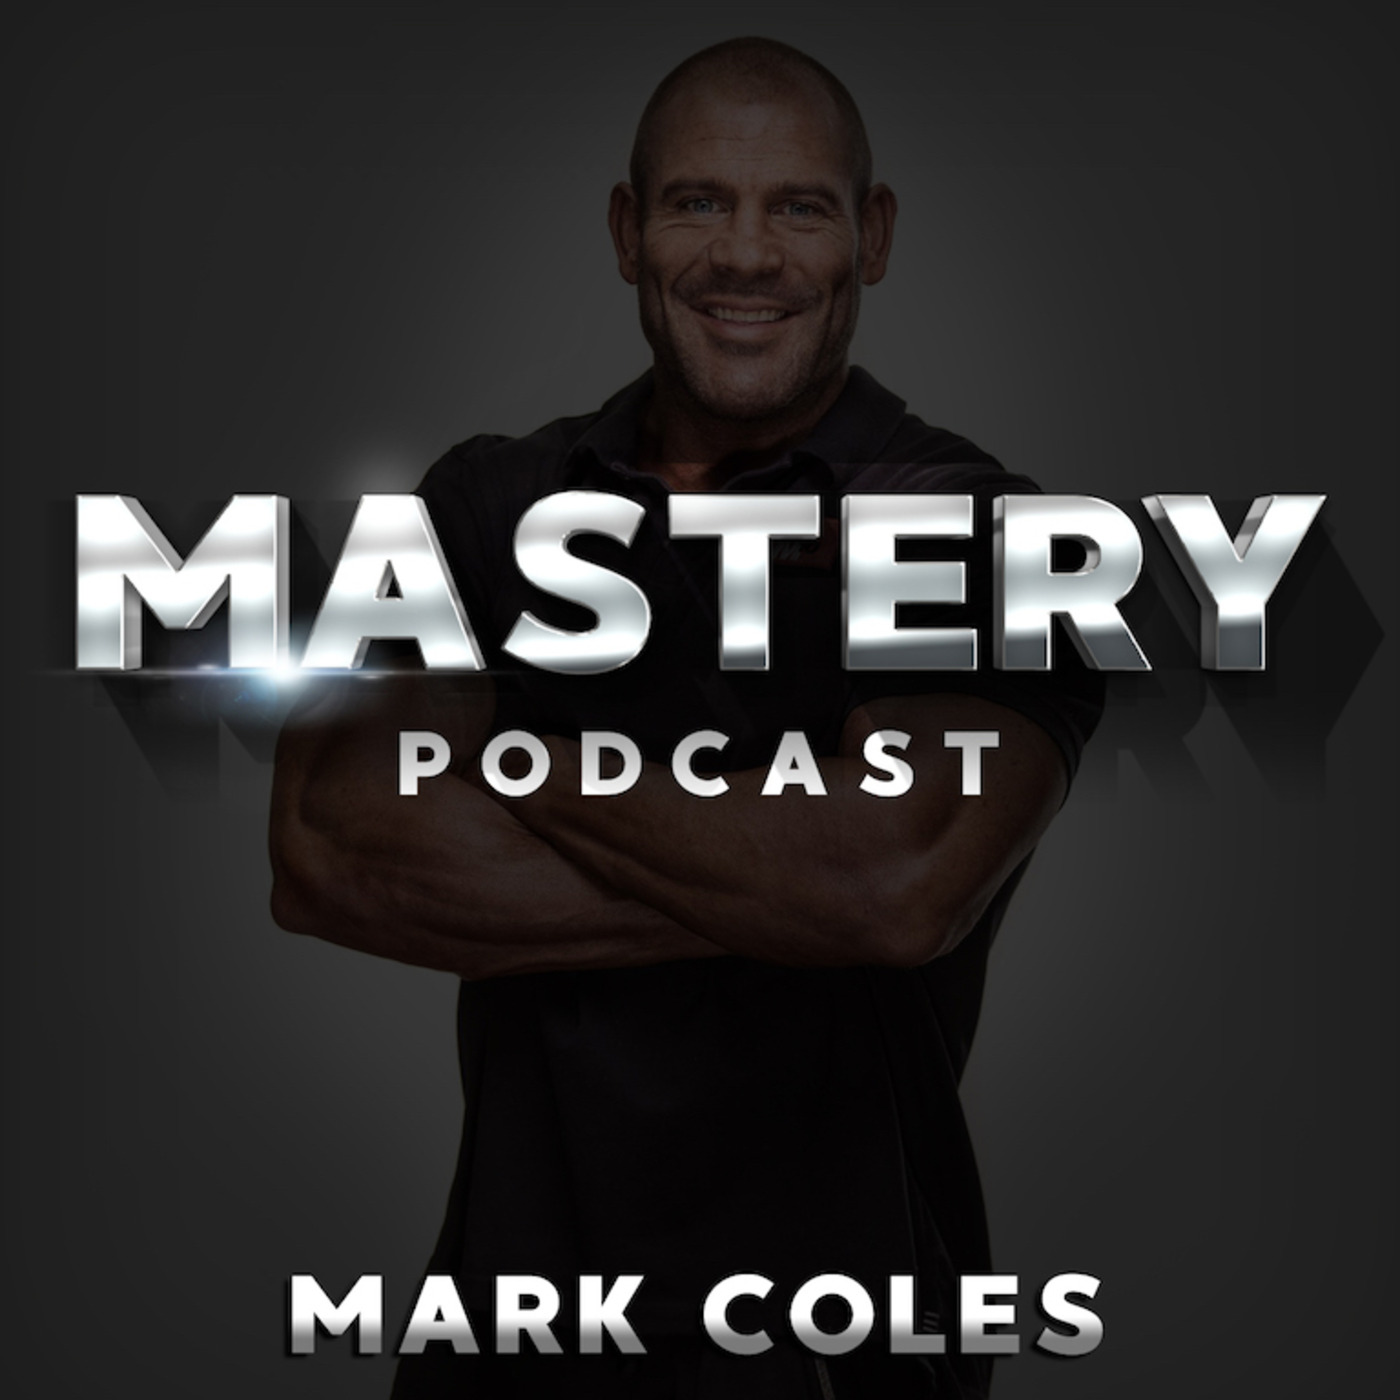 Mastery Podcast with Mark Coles